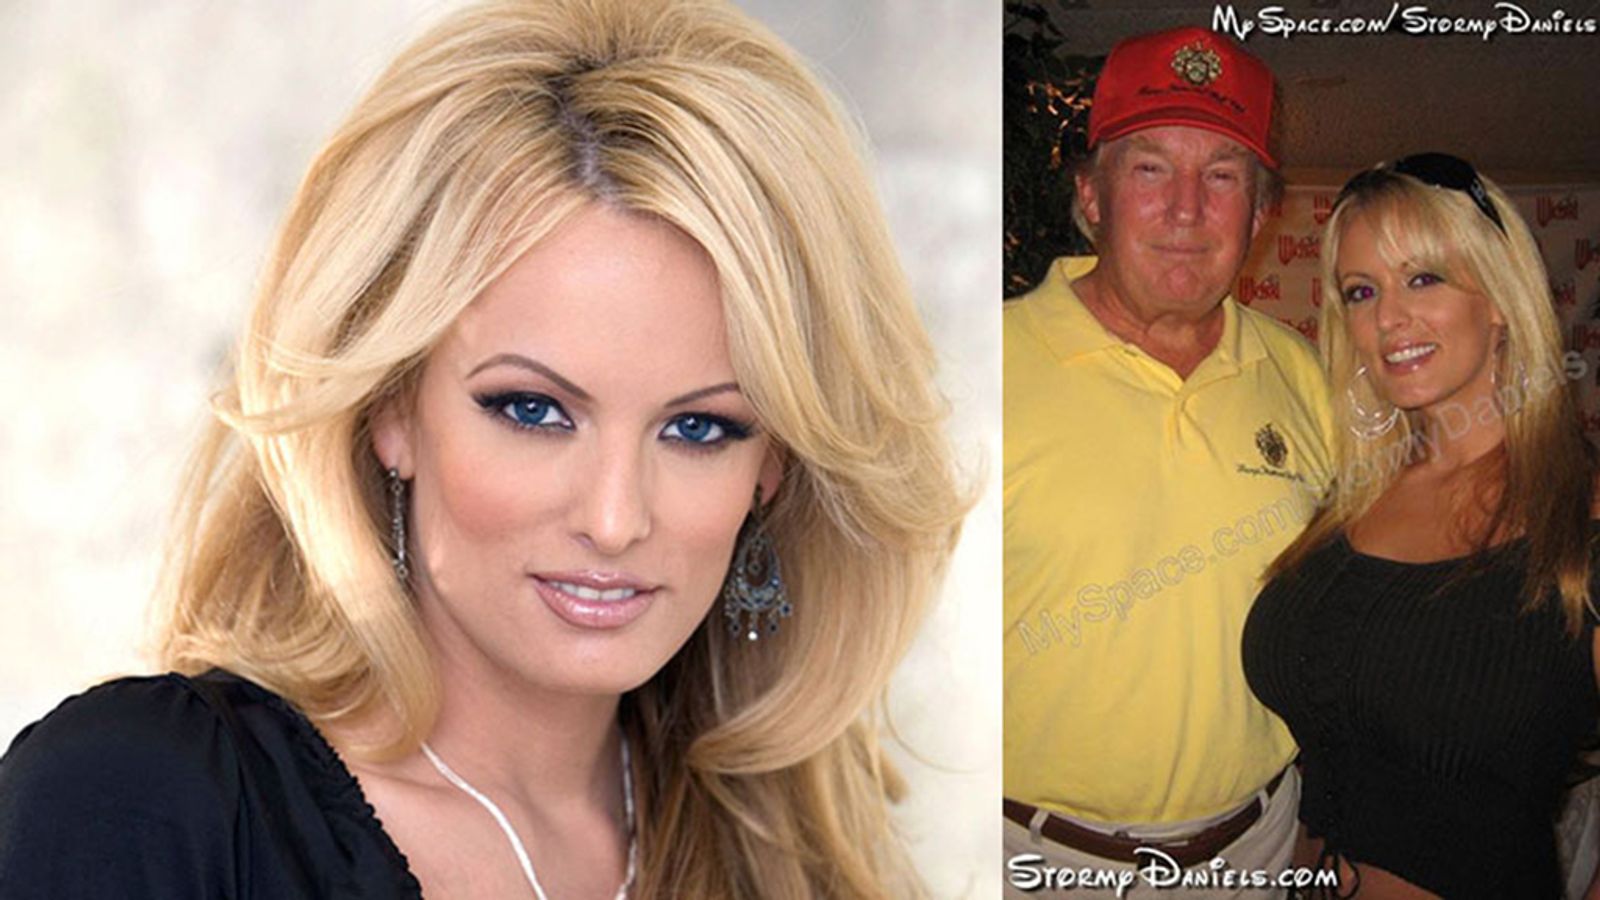 Trump Lawyer Tried To Silence Stormy Daniels In 2011: Report